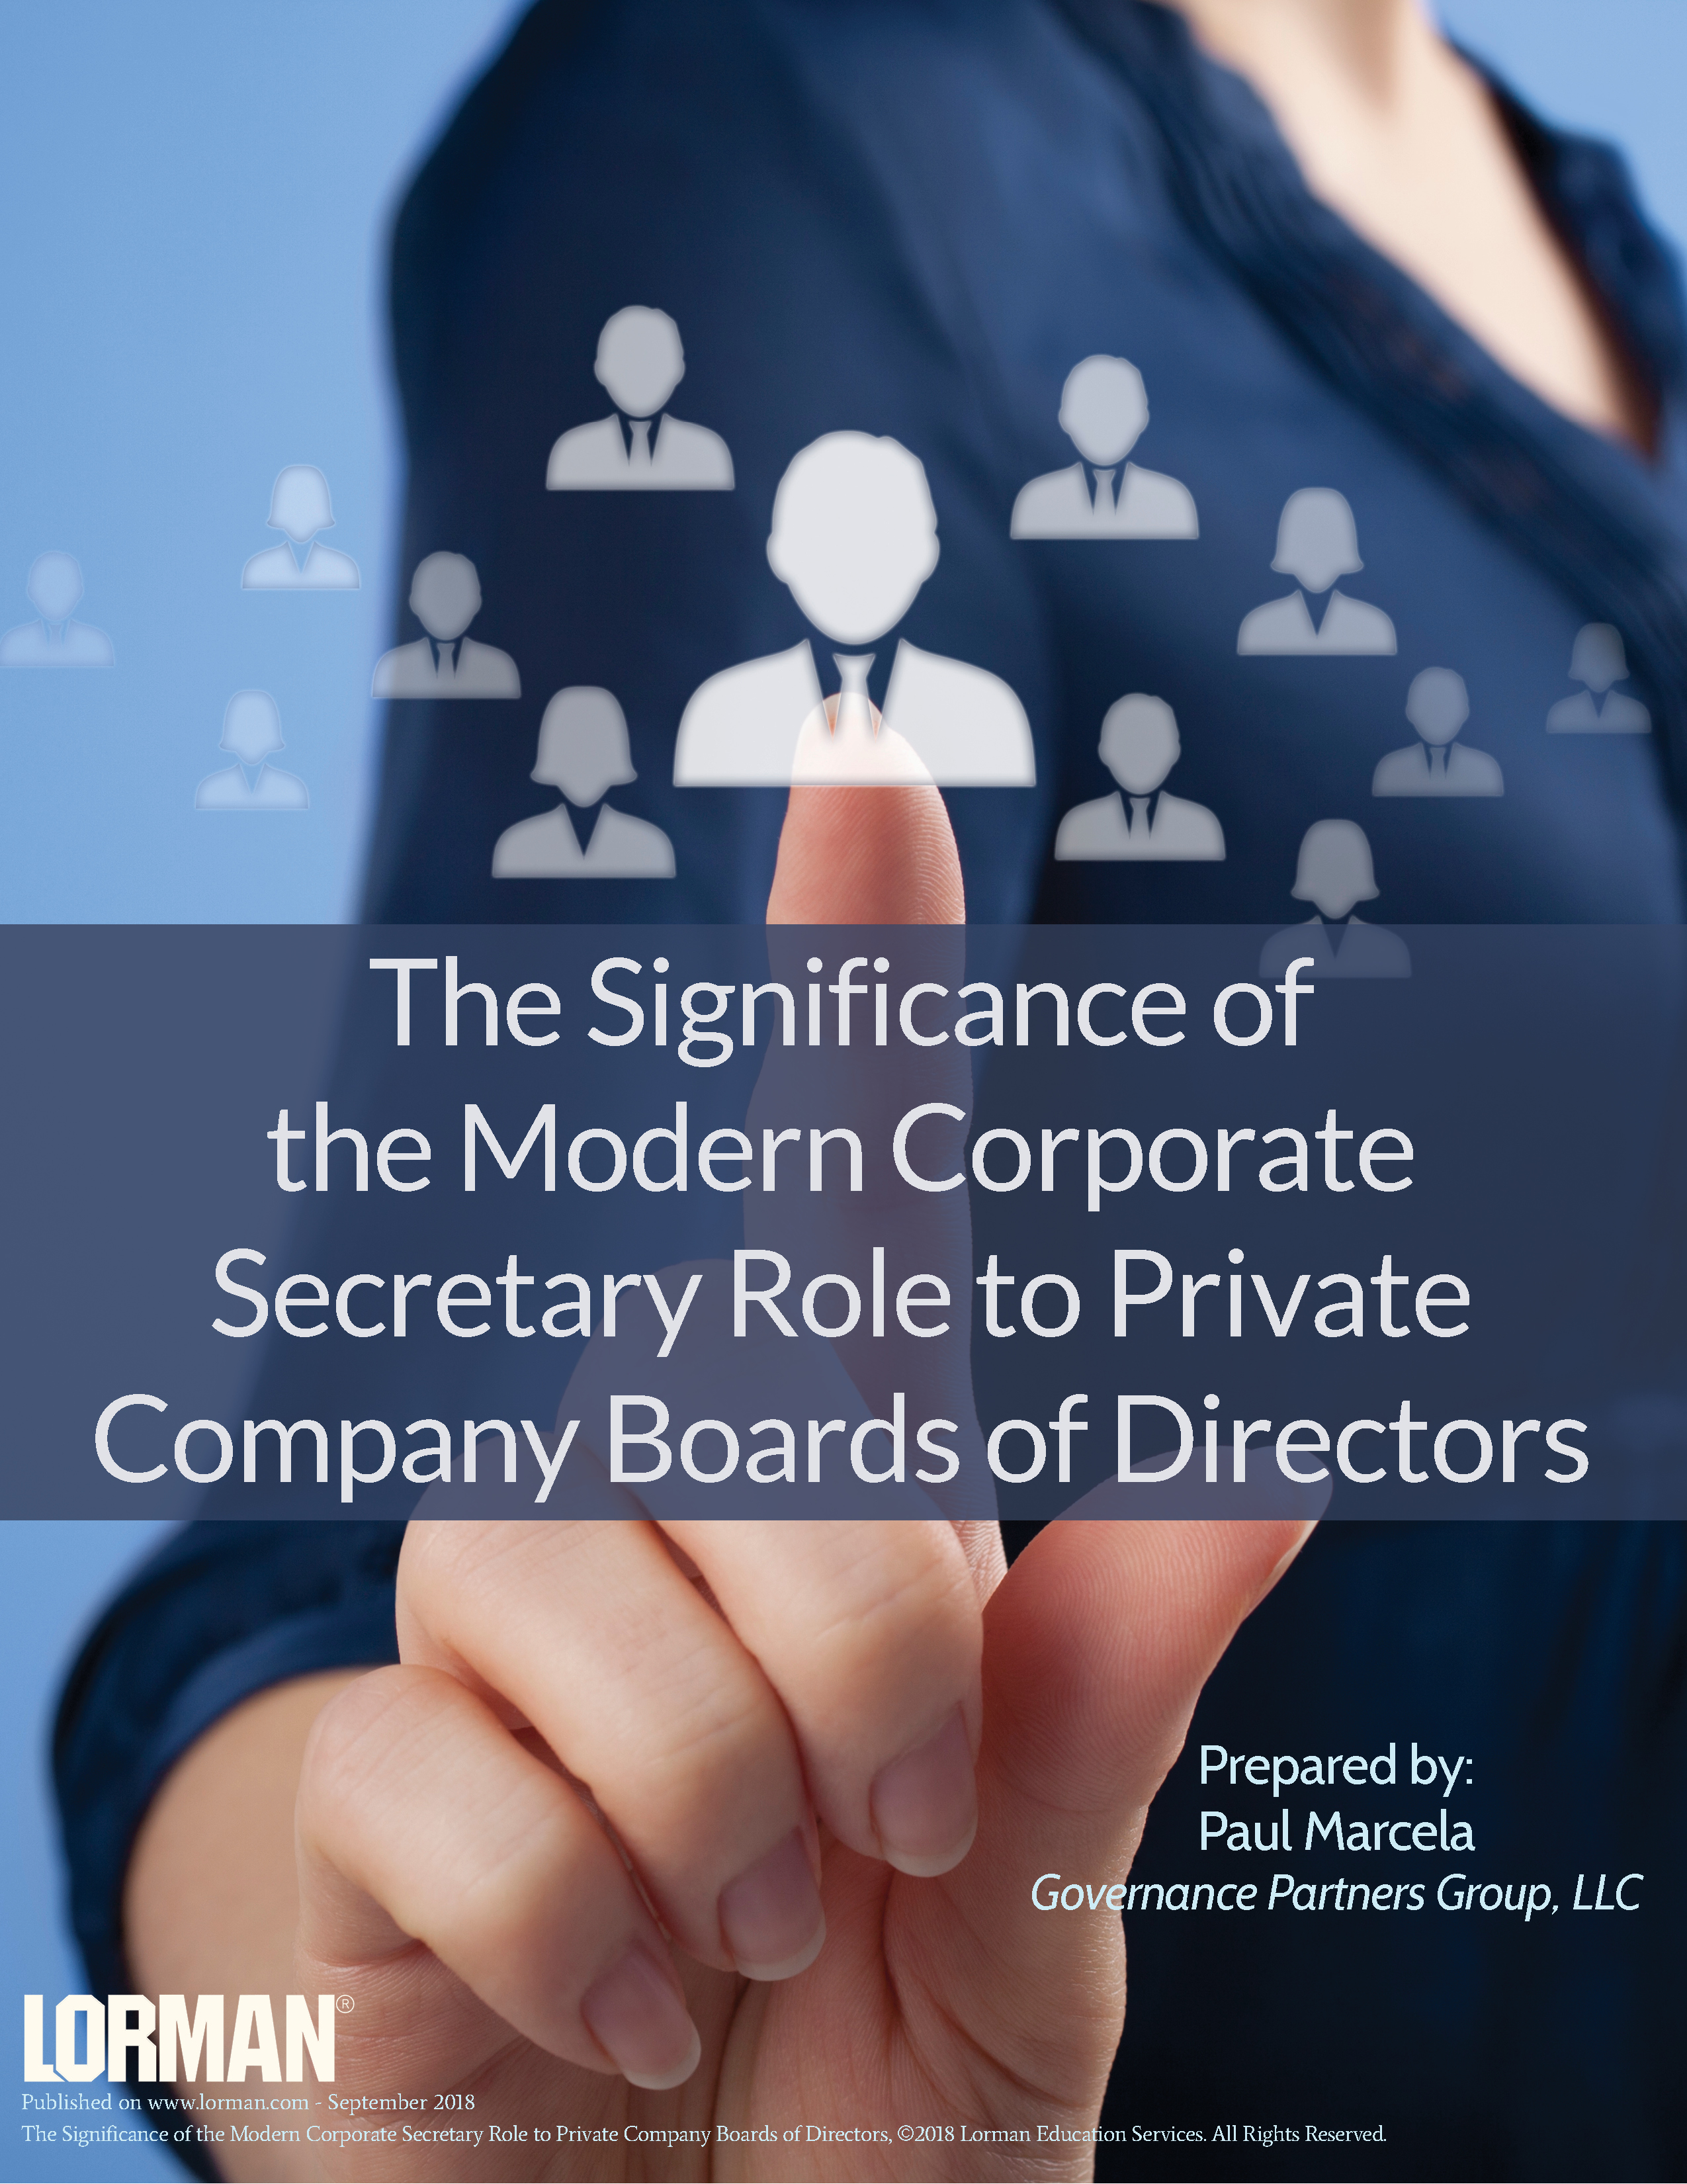 The Significance of the Modern Corporate Secretary Role to Private Company Boards of Directors